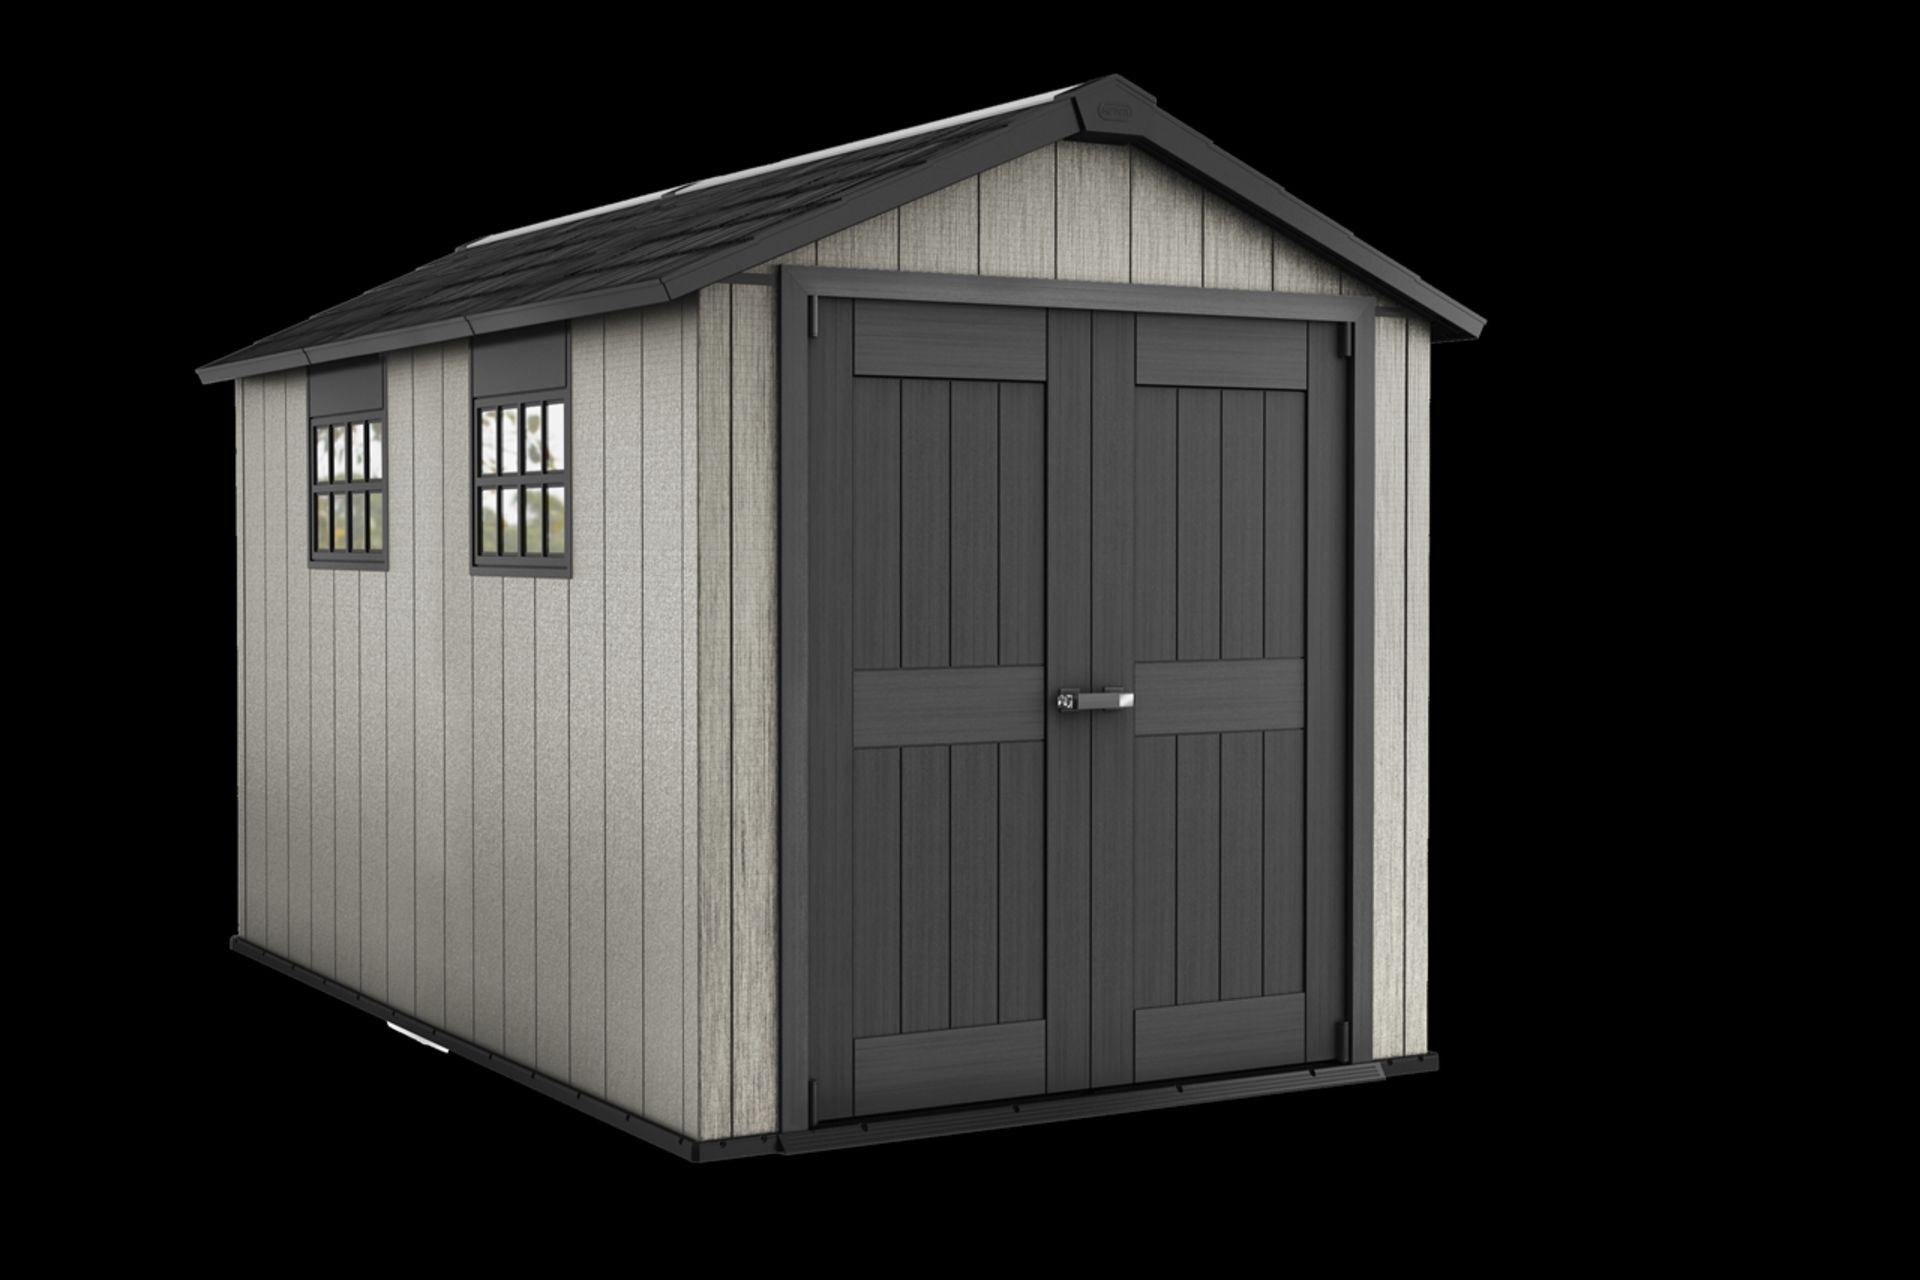 Keter Oakland 7511 7ft 6" x 9ft 4' RRP £1200 - Image 2 of 4